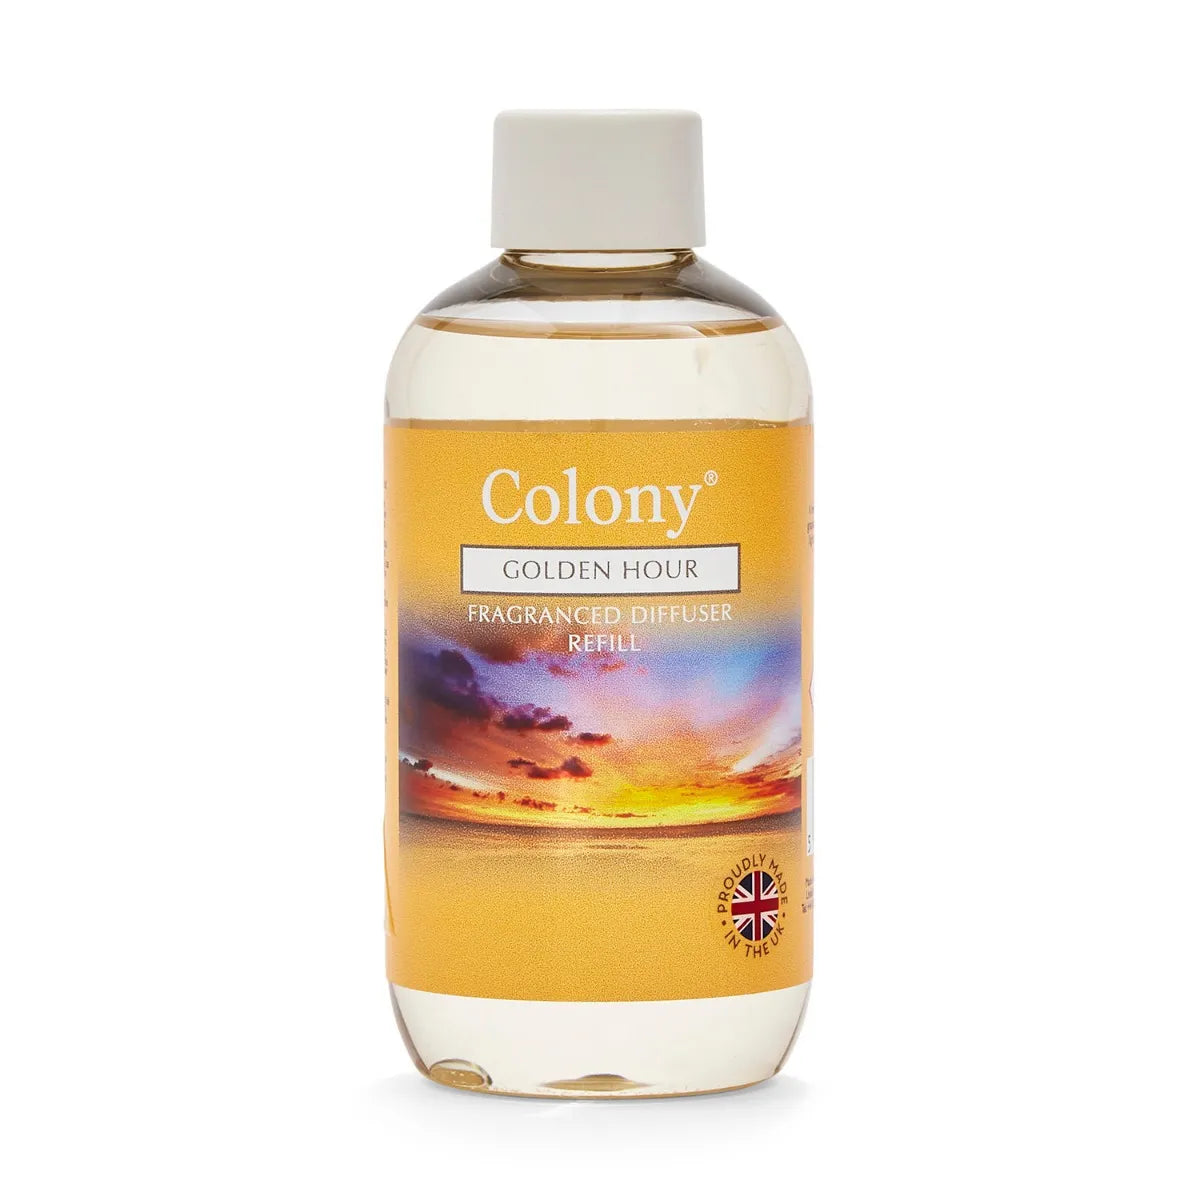 Wax Lyrical Colony Golden Hour 200ml Reed Diffuser Refill